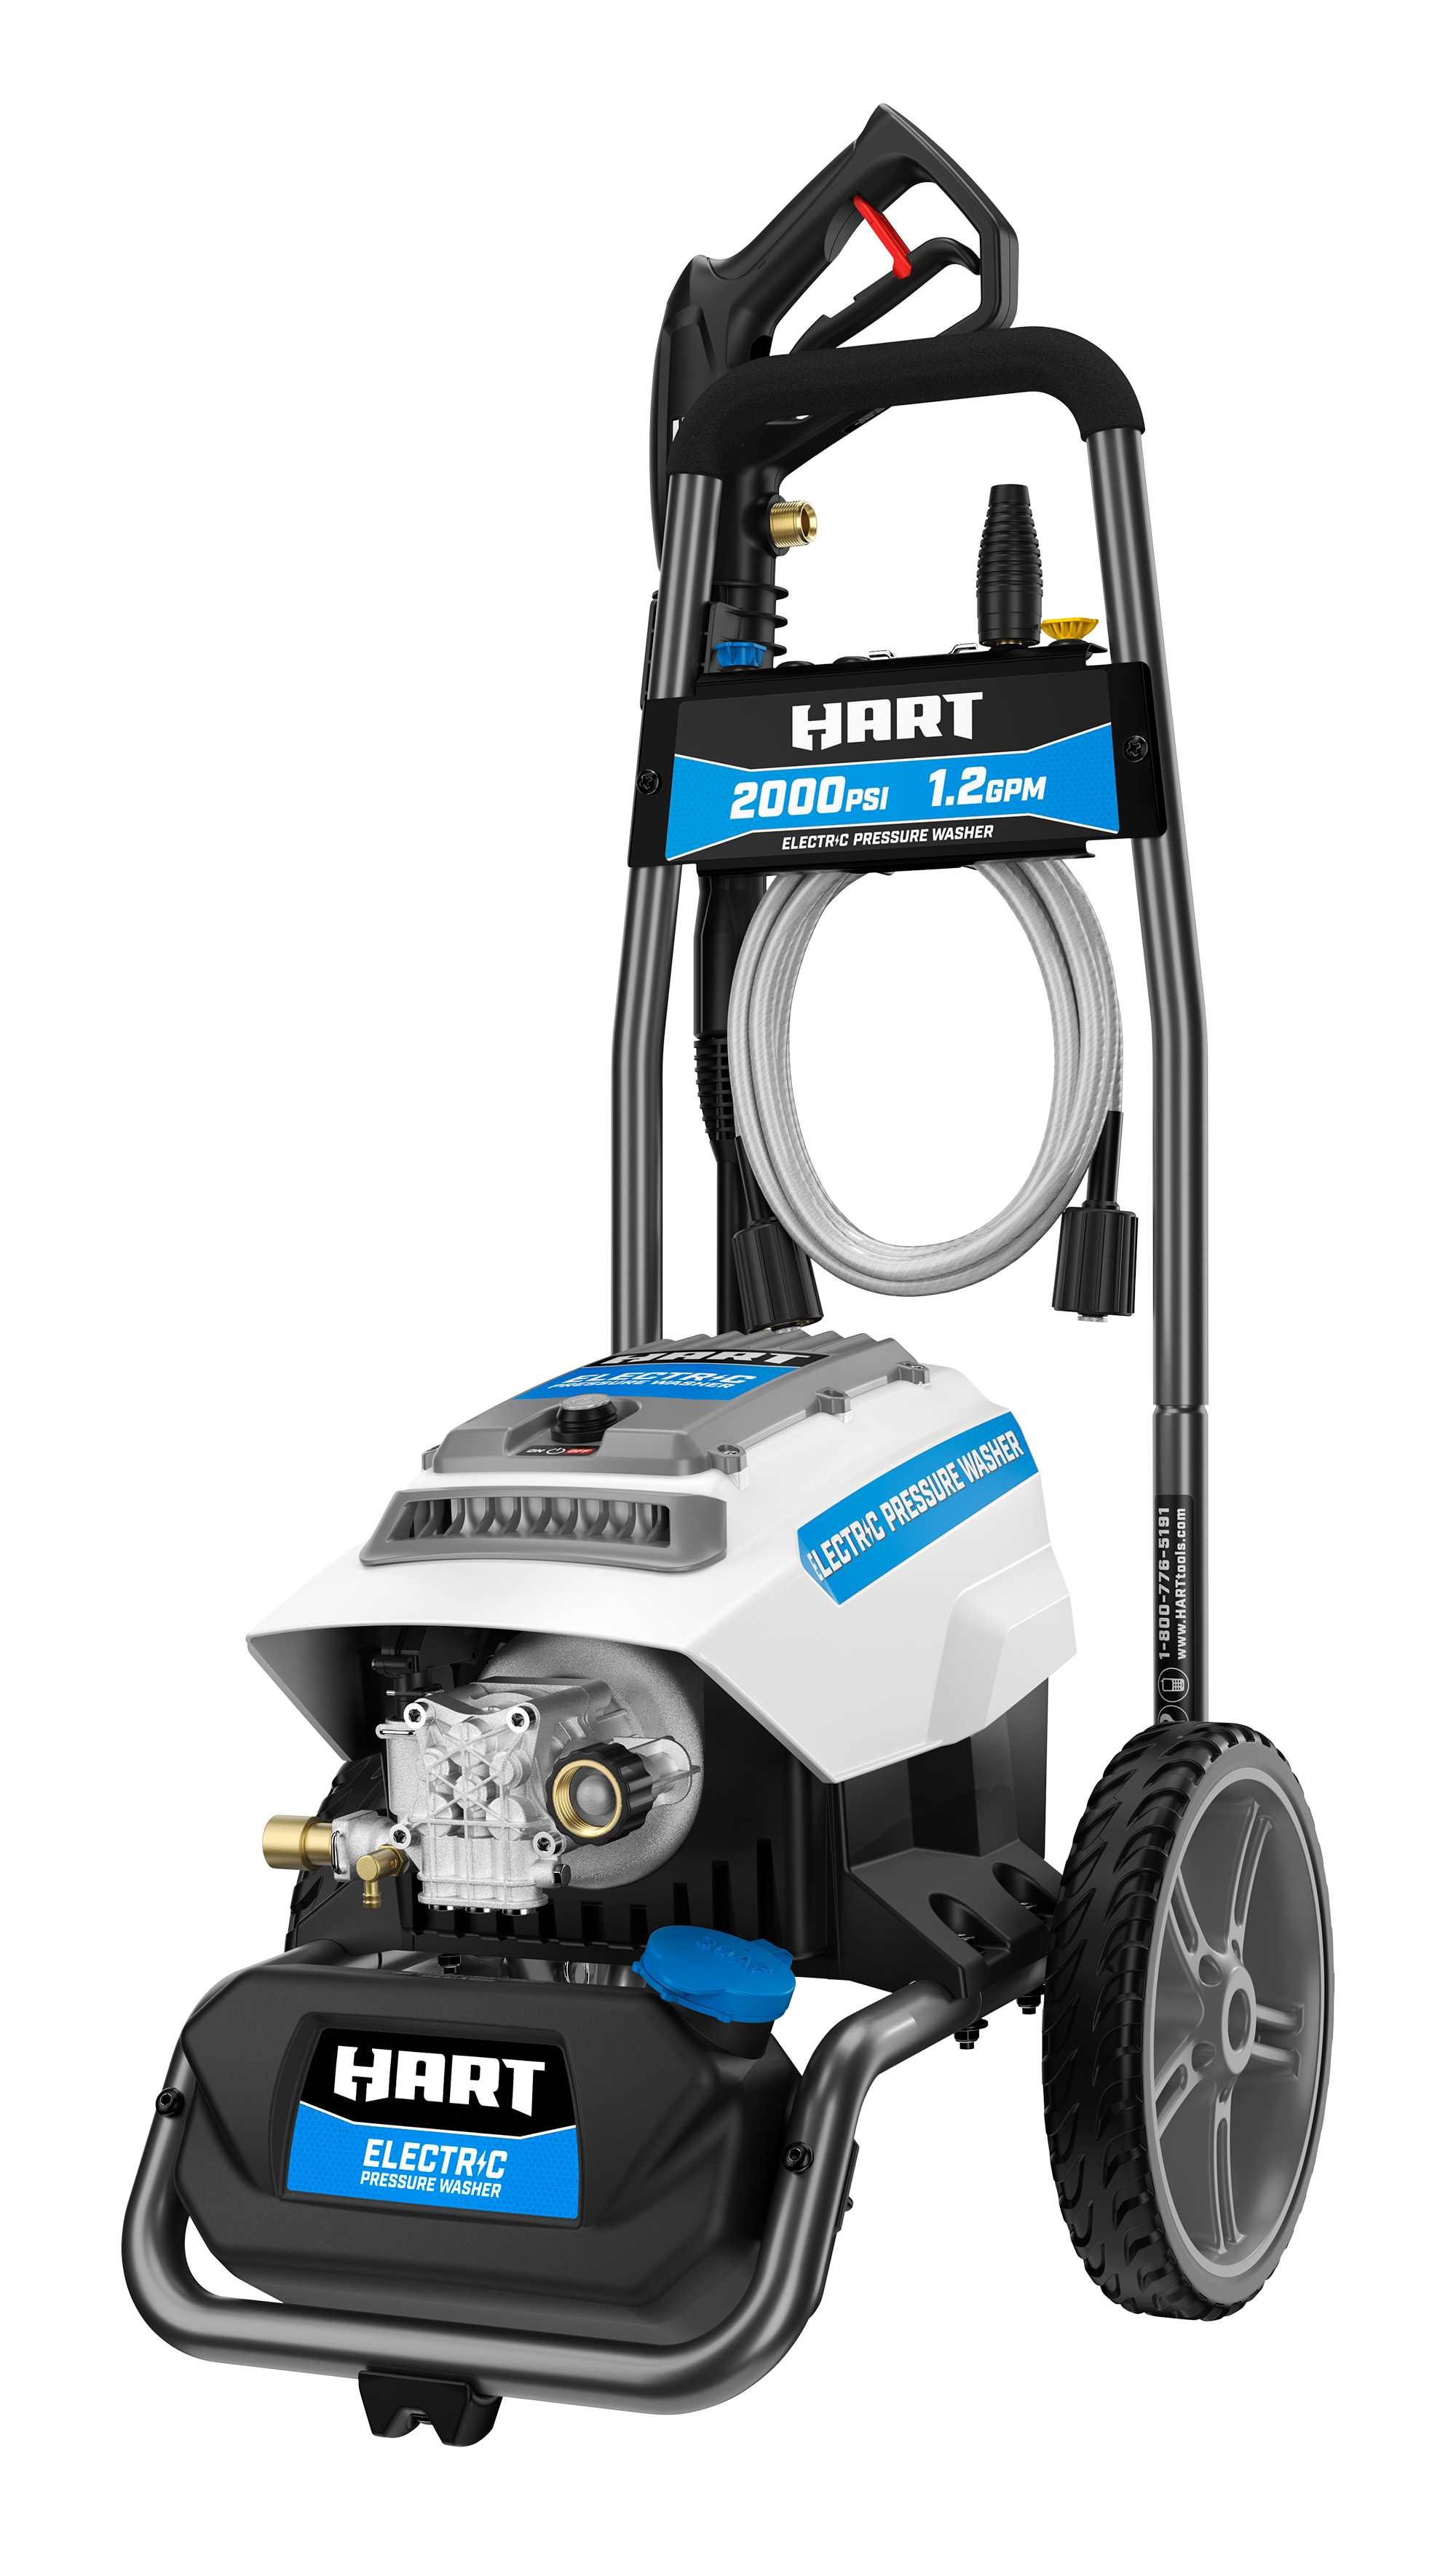 HART 2000PSI 1.2 GPM Electric Pressure Washer - image 3 of 10